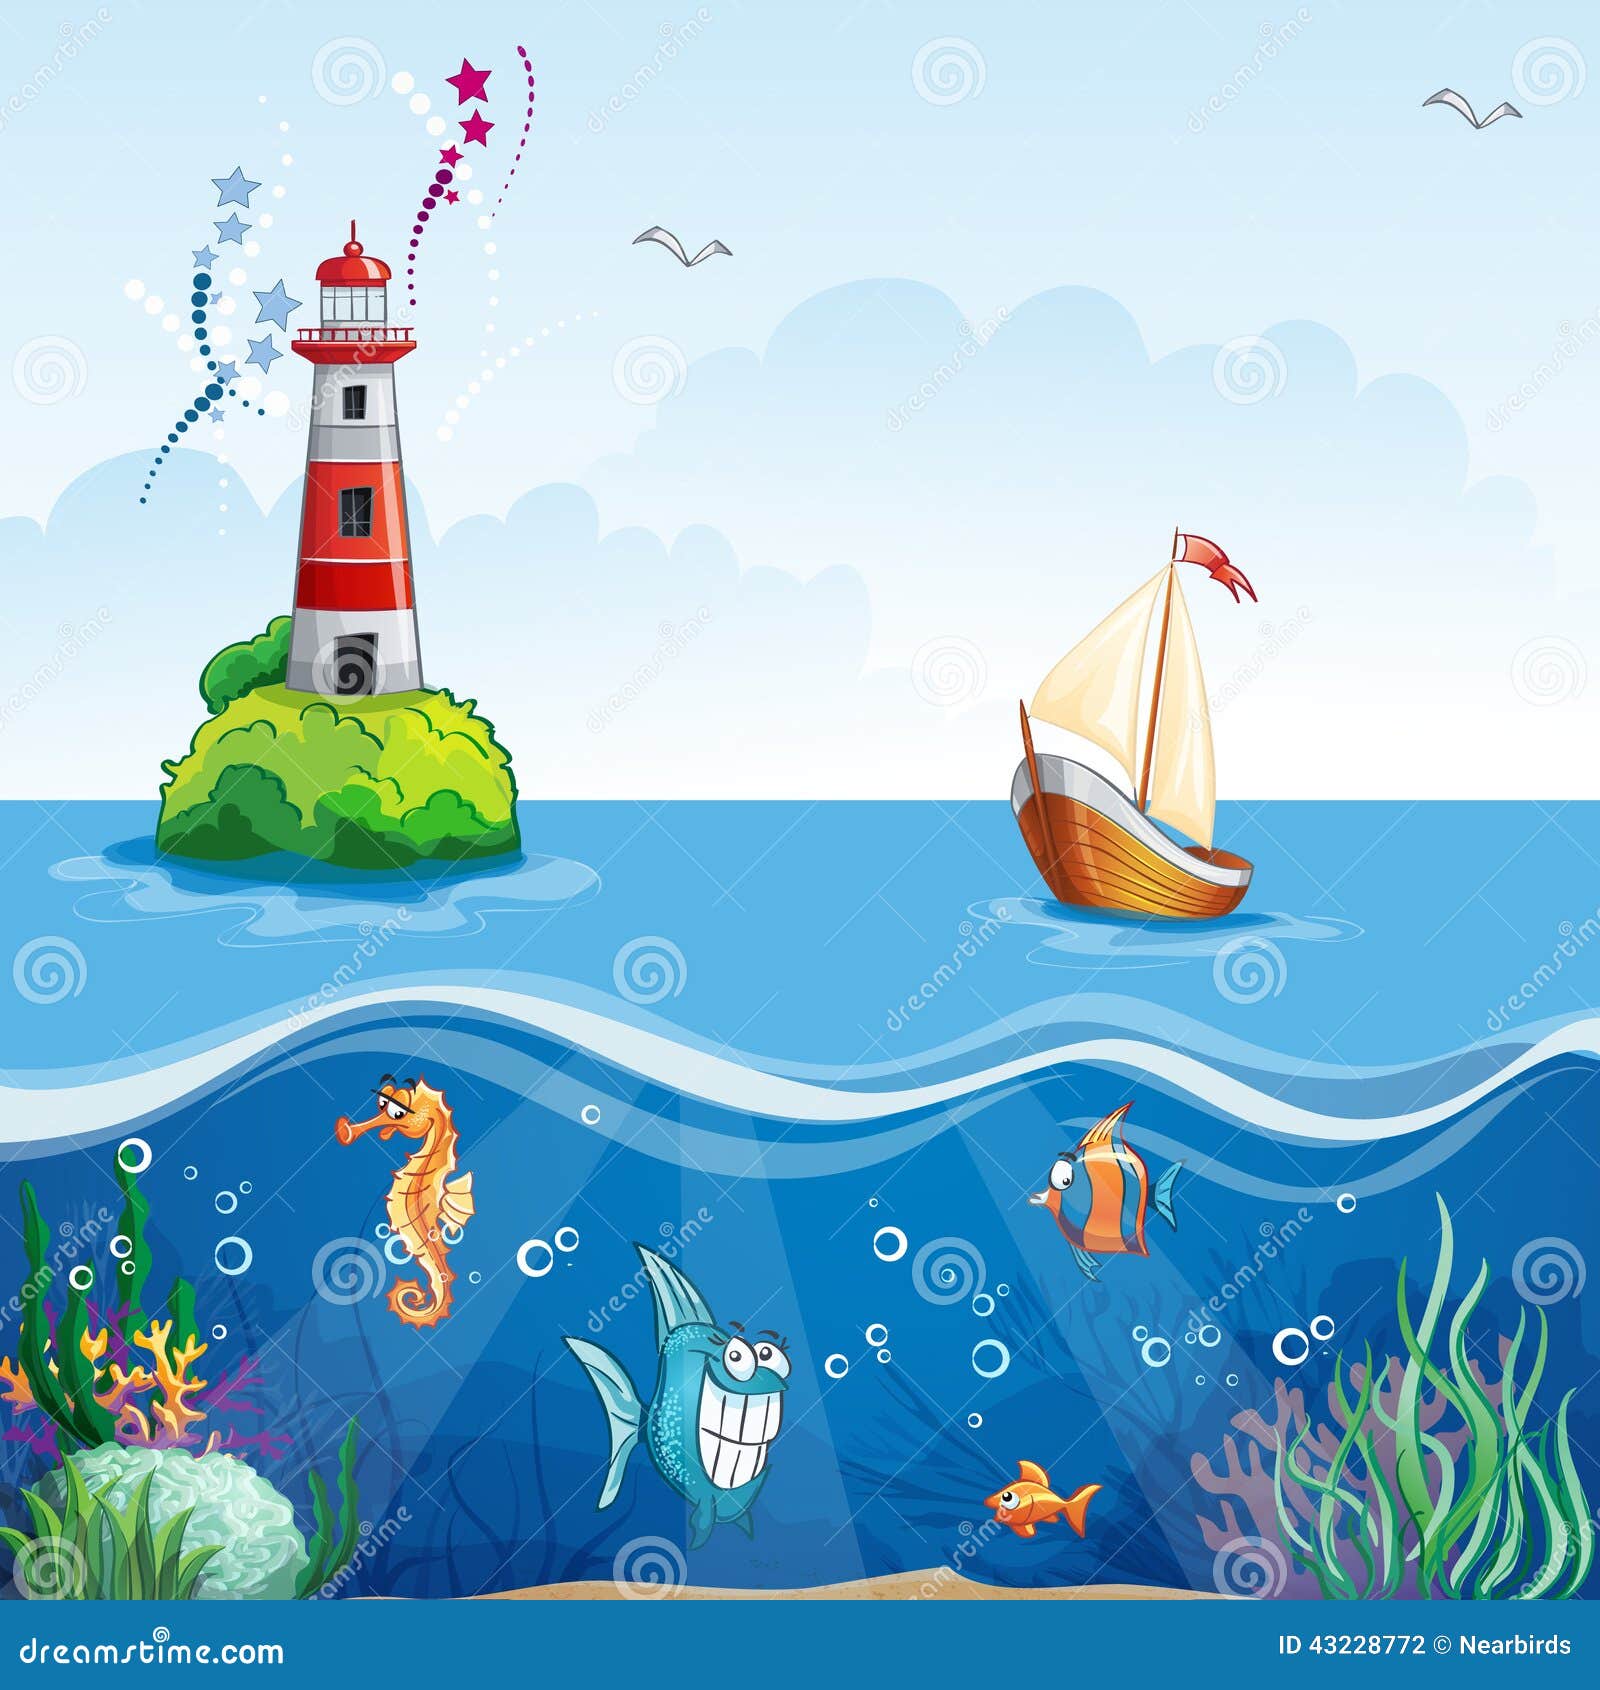 Children's Illustration With Lighthouse And Sailboat. On 